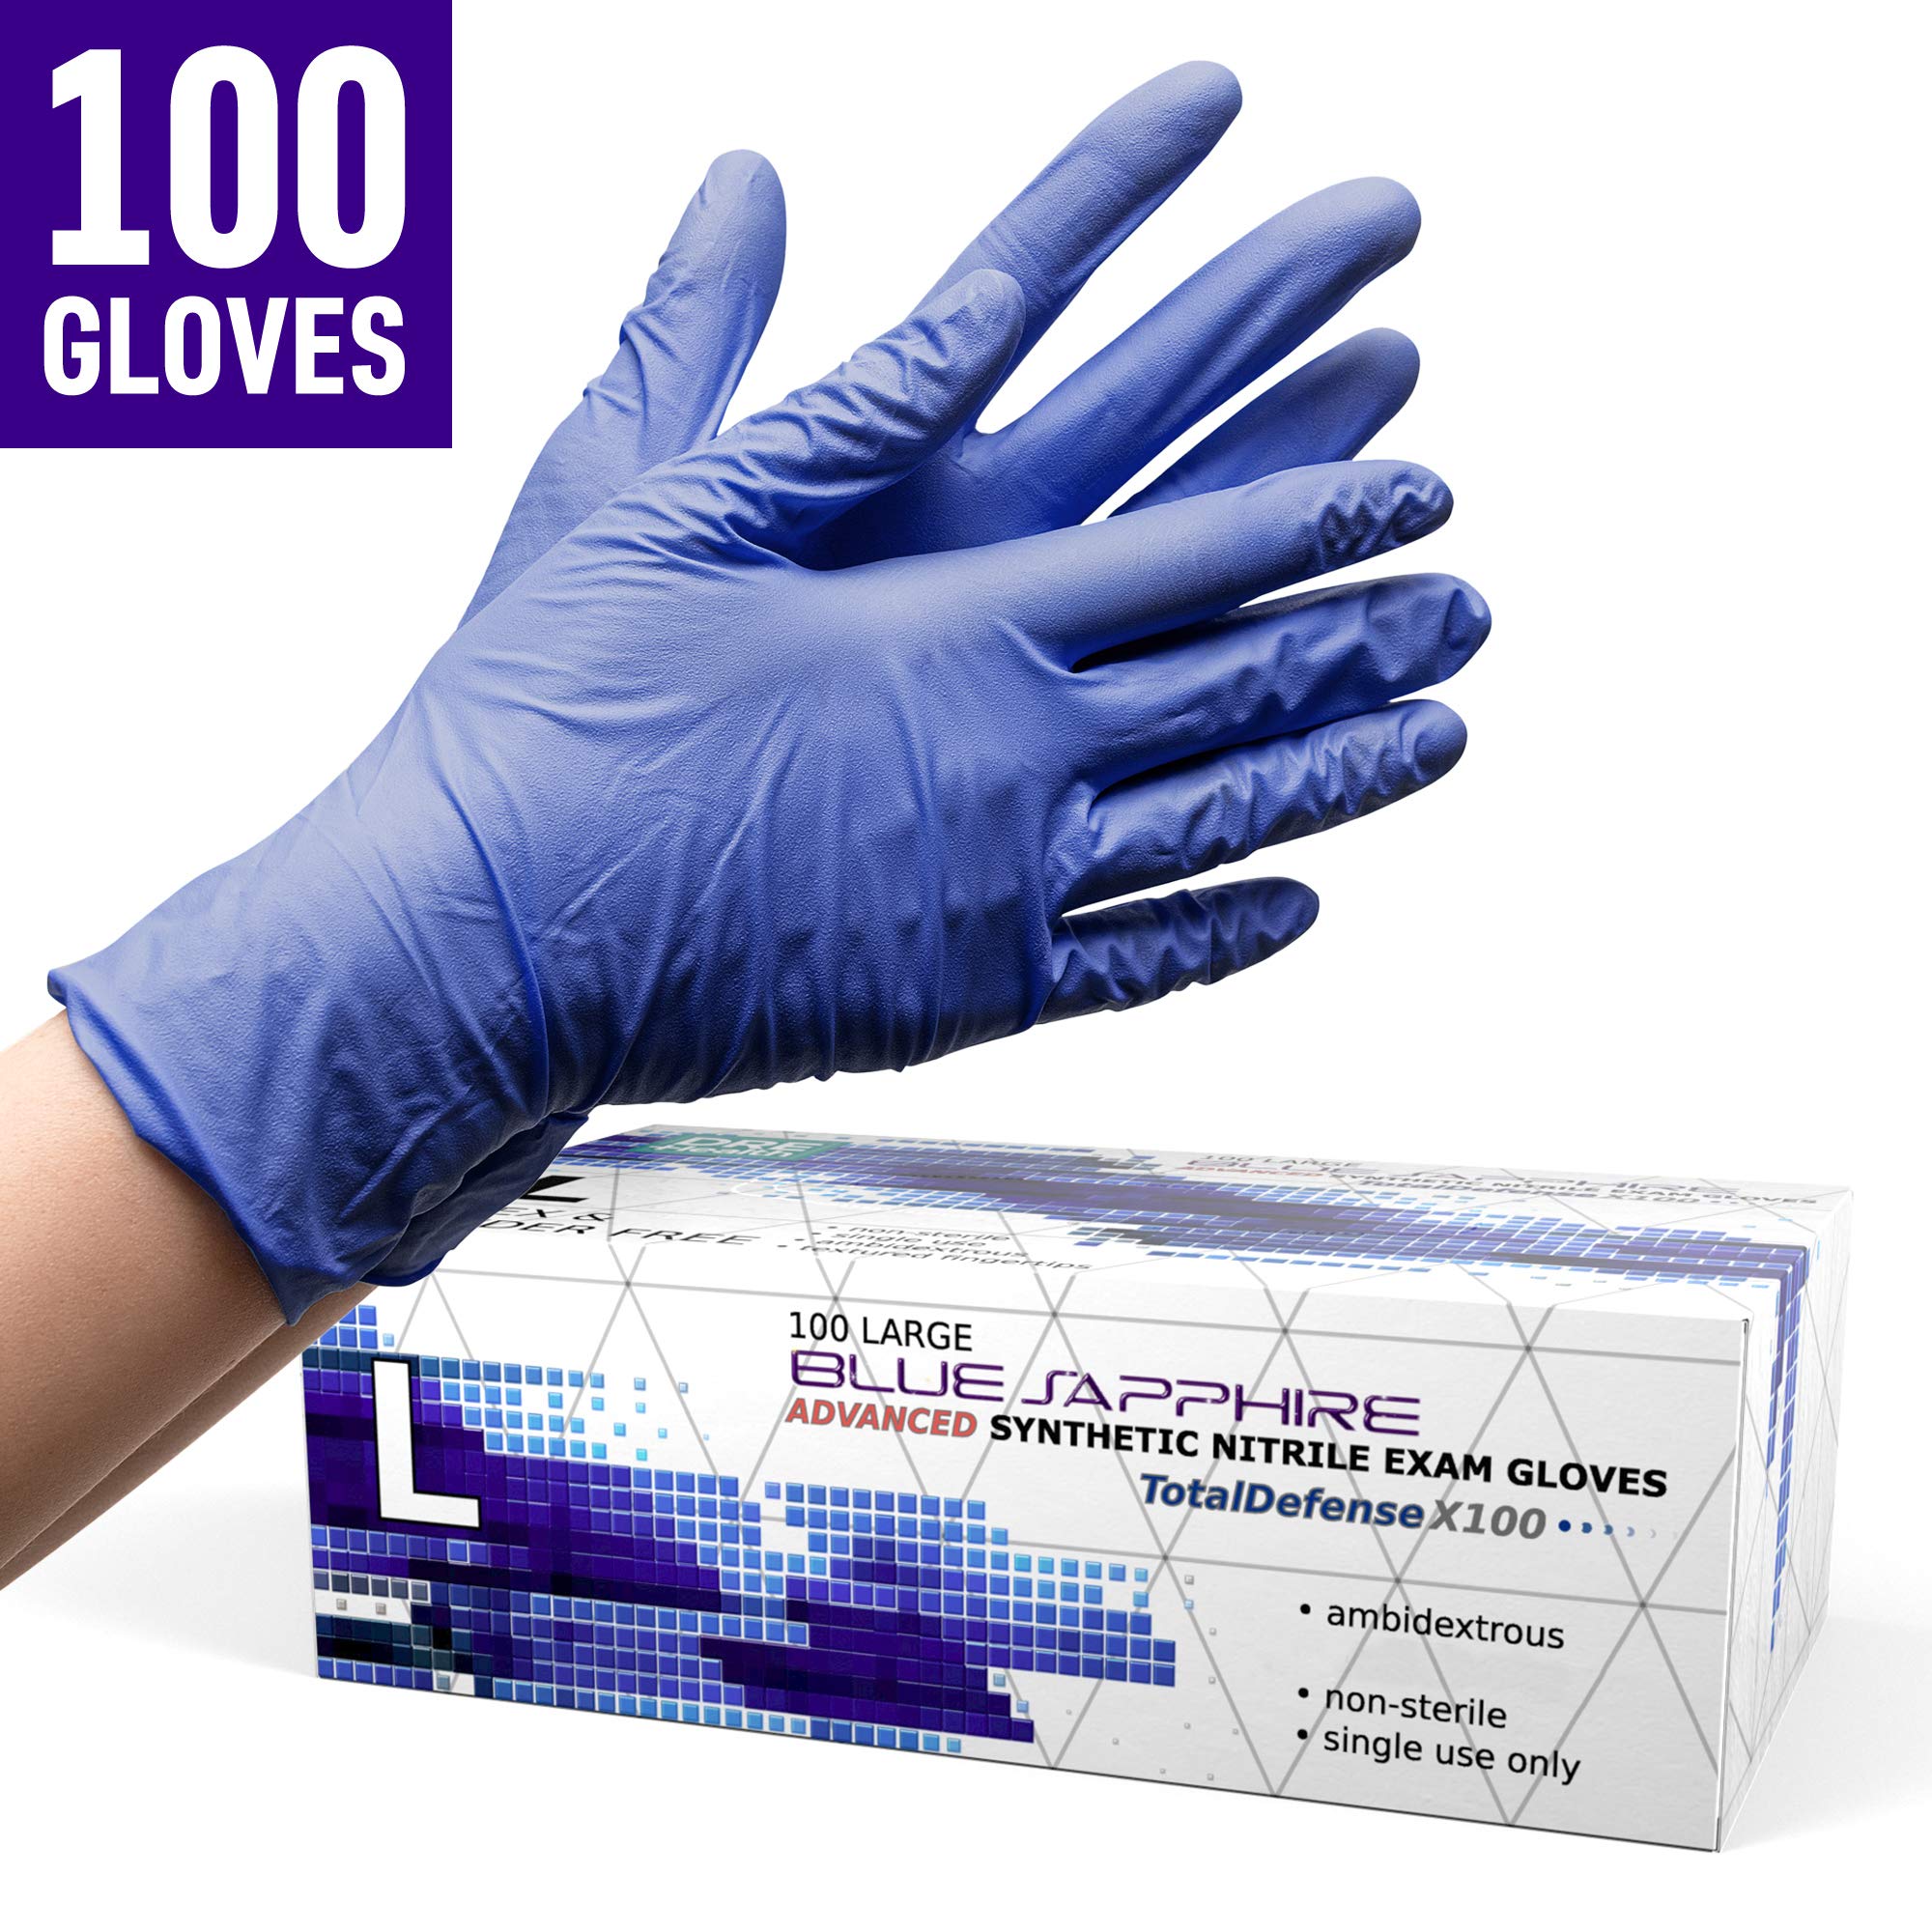 Dre Health Synthetic Nitrile Disposable Gloves Large -100 Pack -Latex Free Medical Gloves